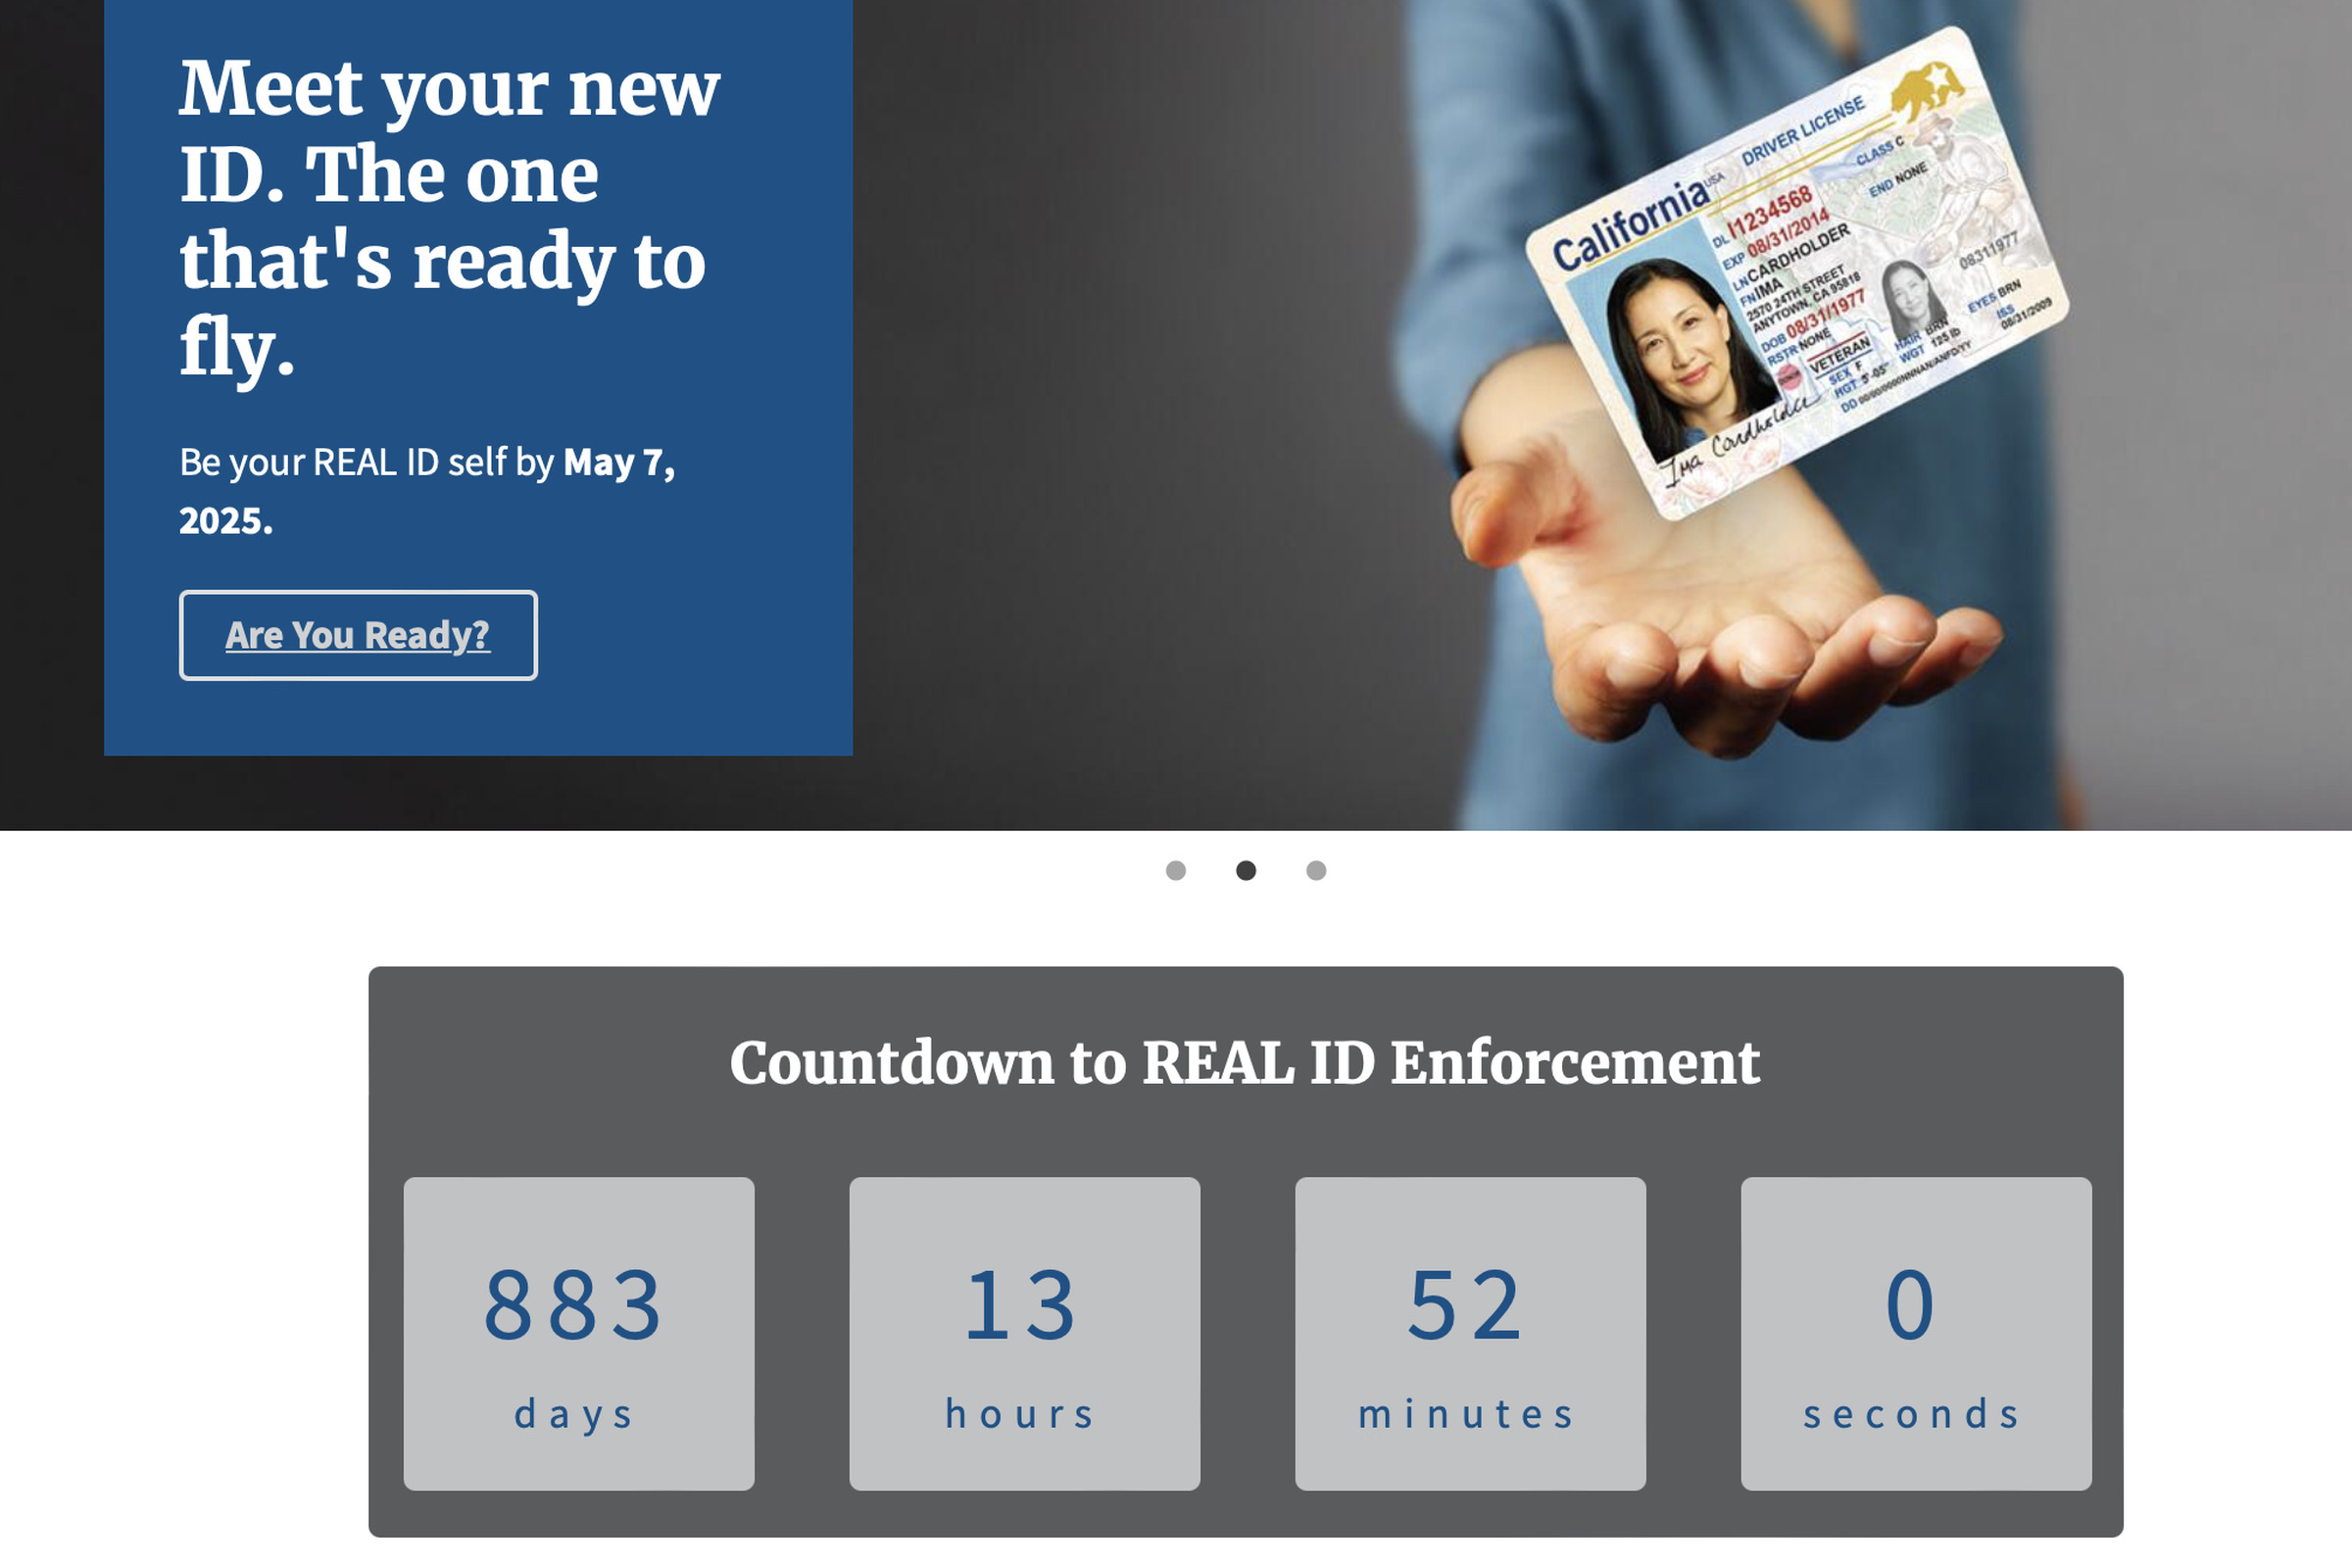 Screenshot of the DHS’ website, showing a countdown to real ID enforcement with 883 days remaining.